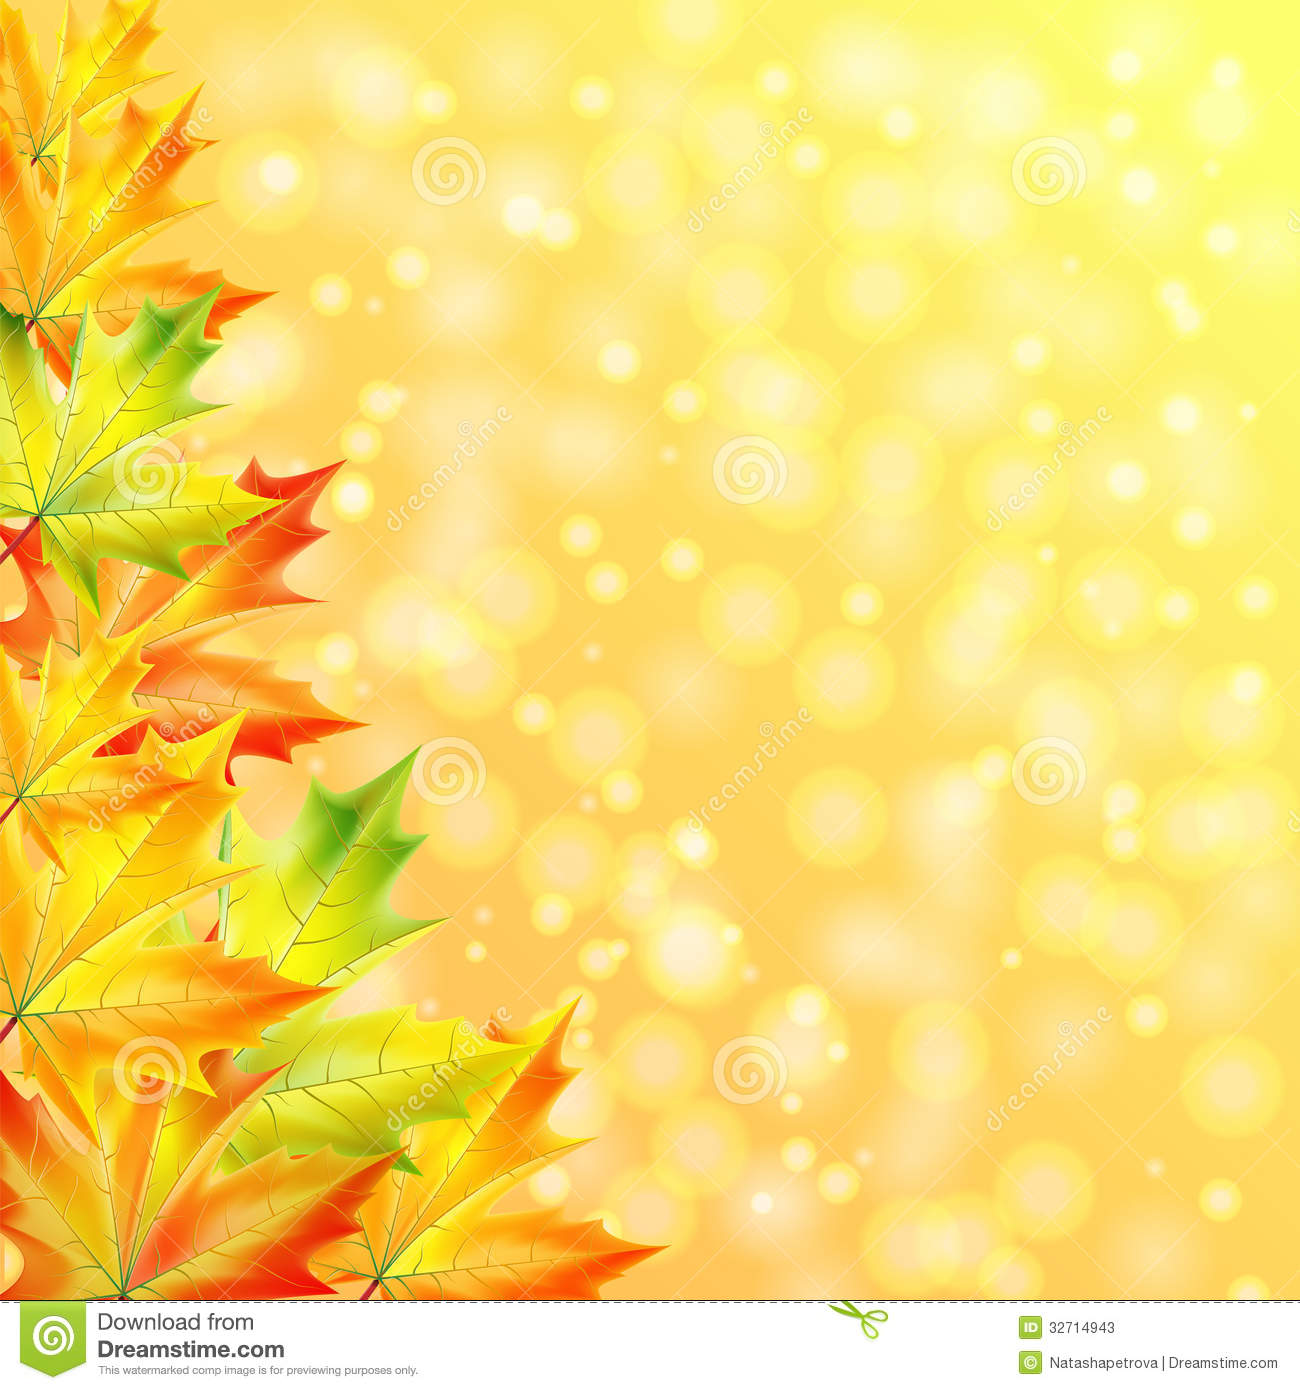 Autumn Maple Leaves On A Yellow Sparkling Background Autumn Background